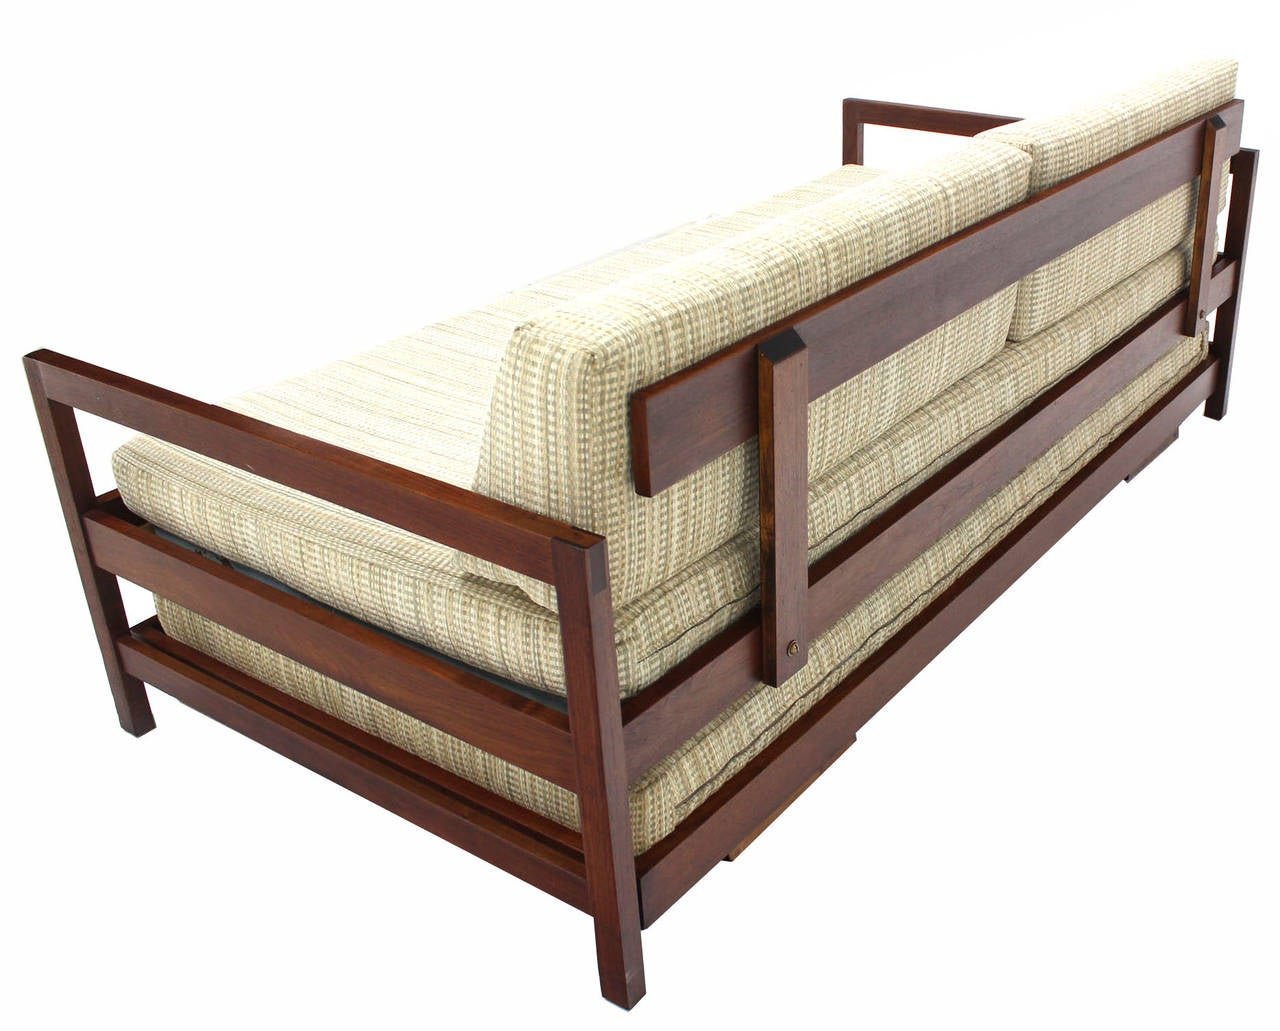 American Solid Walnut Frame Mid-Century Modern Trundle, Pull-Out Daybed